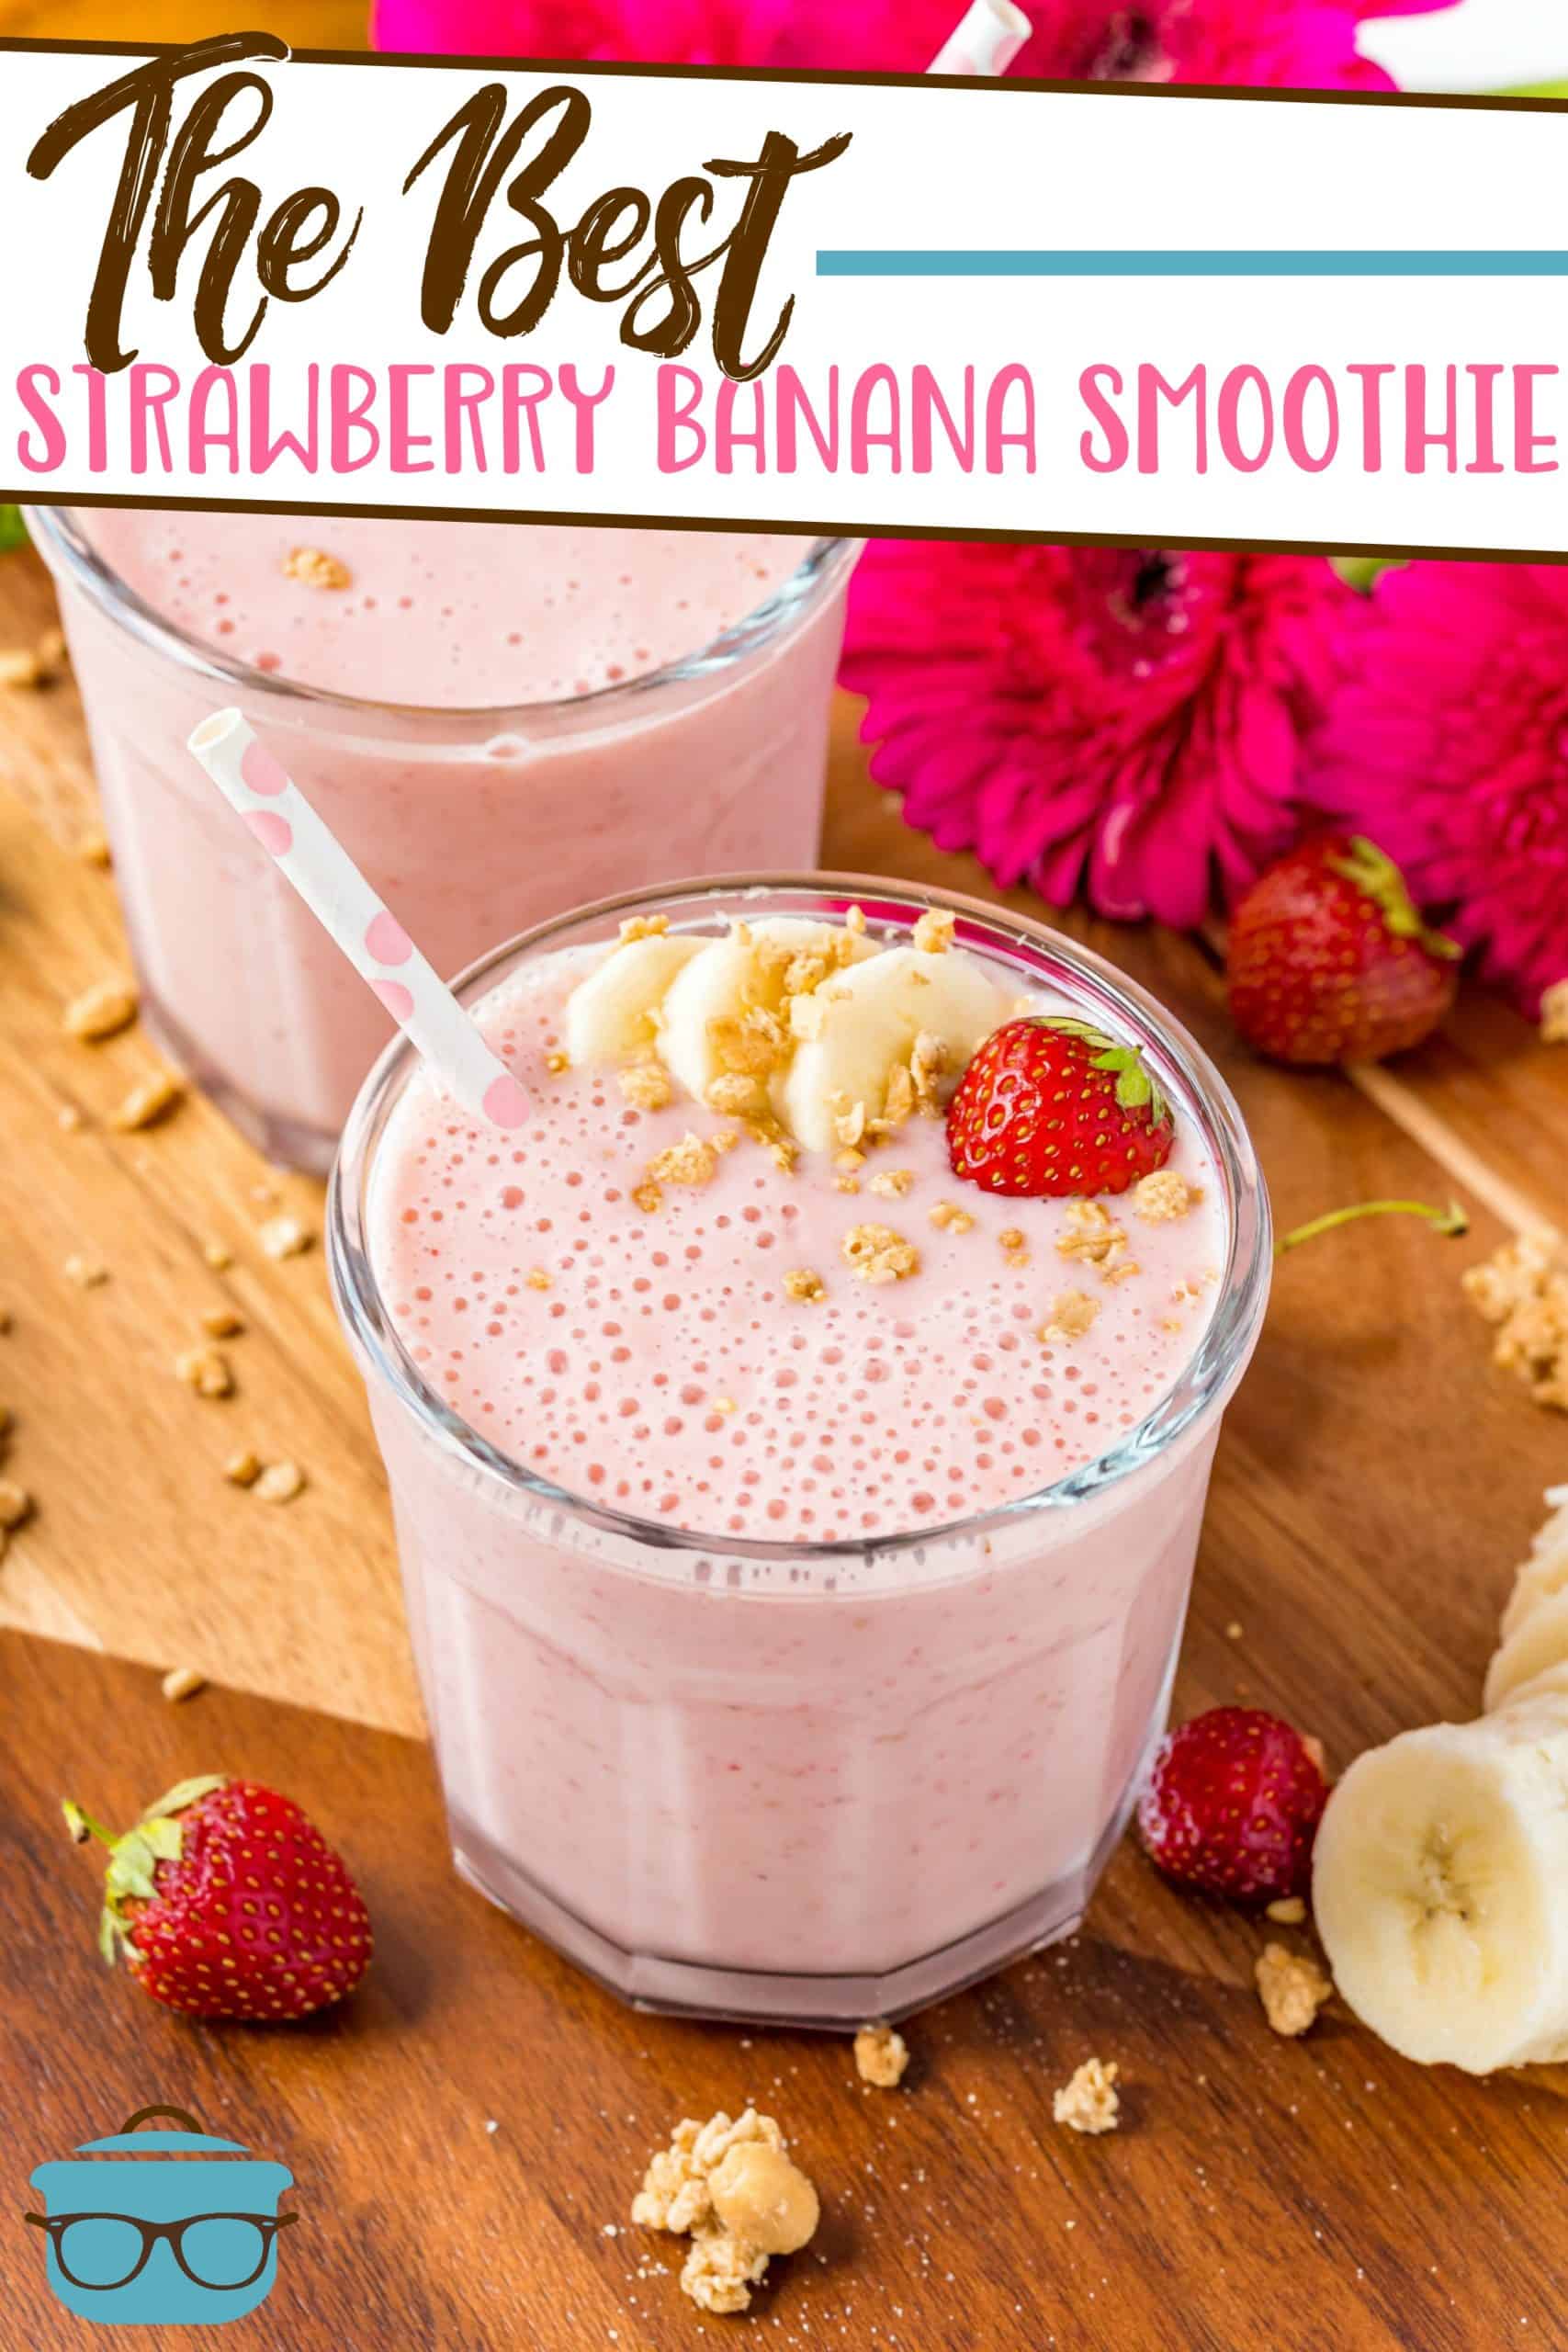 The Best Strawberry Banana Smoothie recipe from The Country Cook, pictured served int two clear glasses, with a straw and topped with a fresh strawberry and sliced banana.